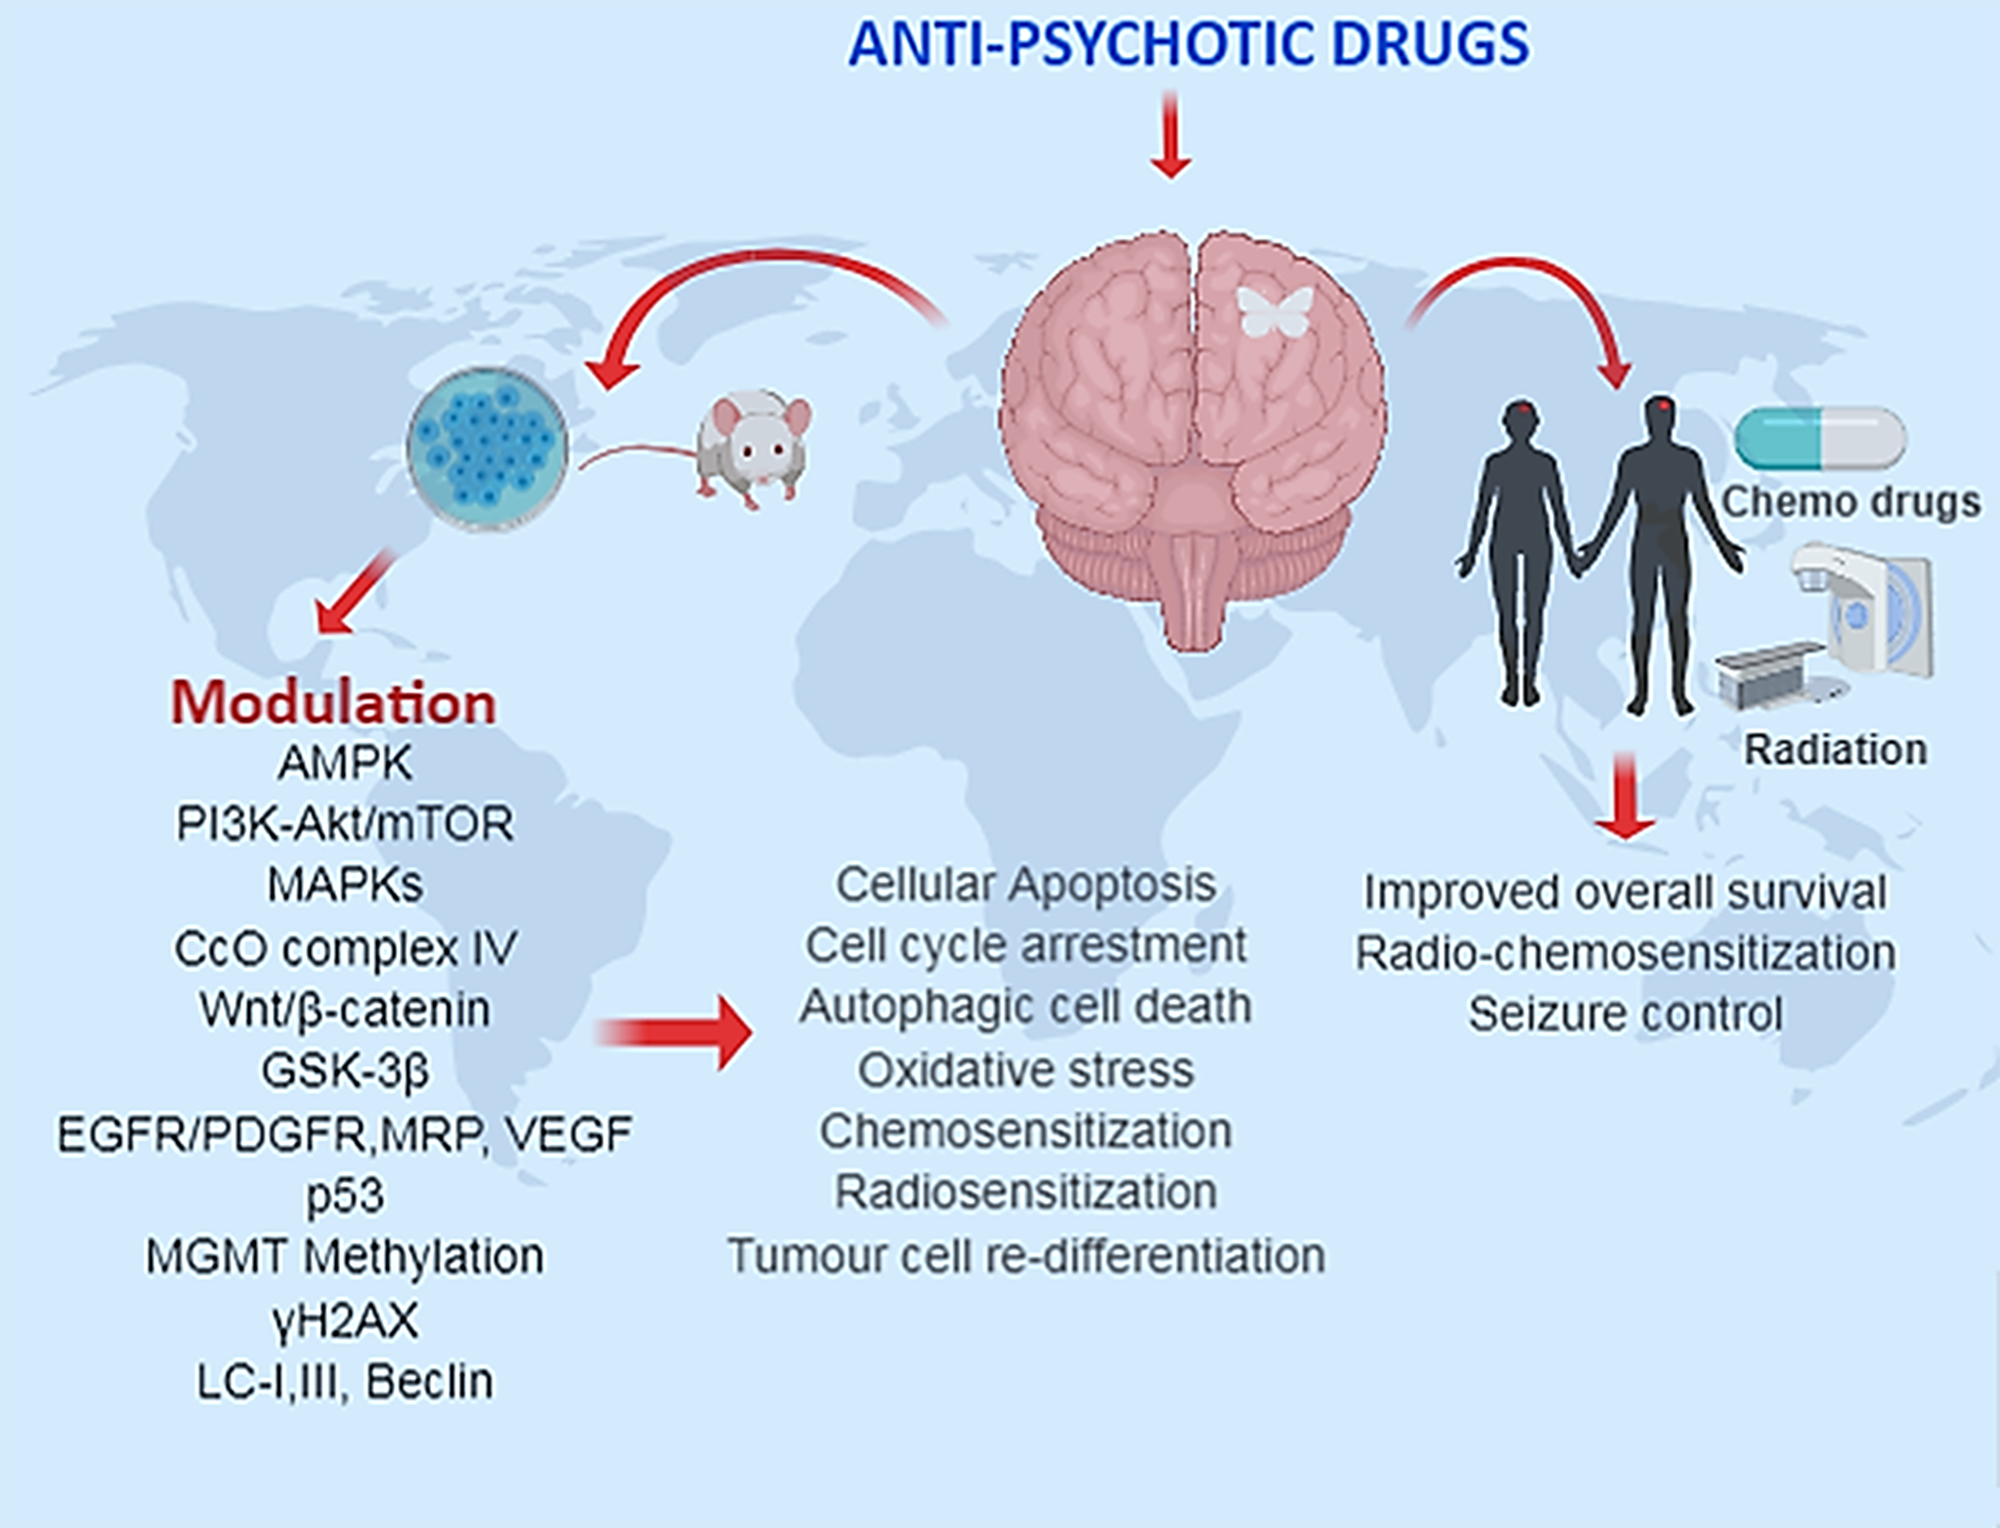 The summarized use of anti-psychotic drugs in preclinical and clinical glioma studies.